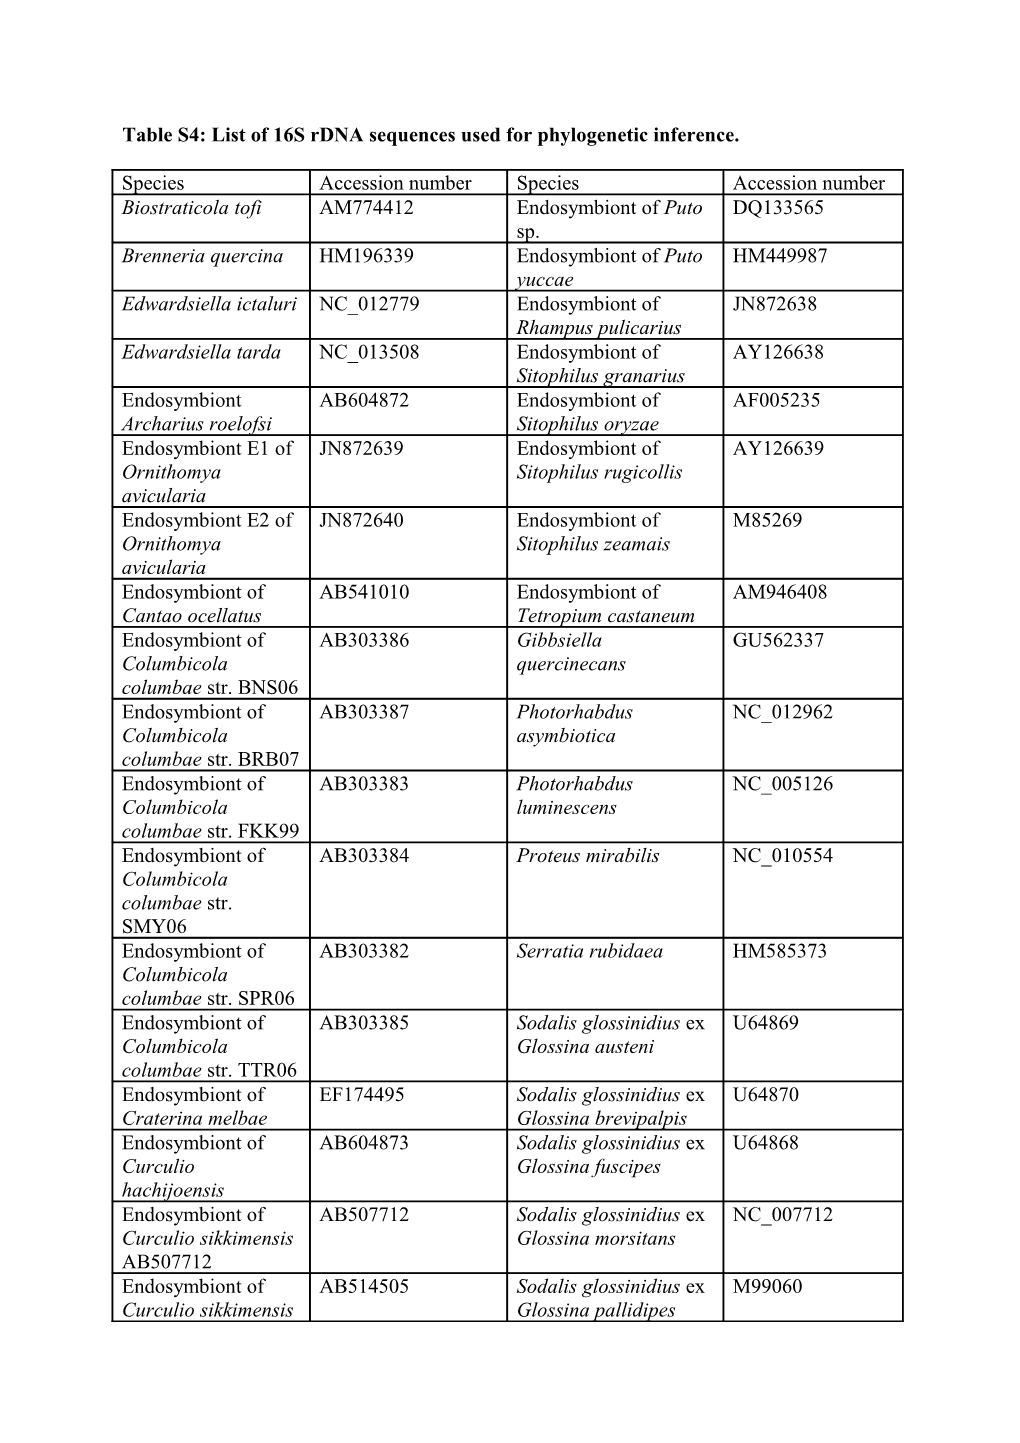 Table S4: List of 16S Rdna Sequences Used for Phylogenetic Inference